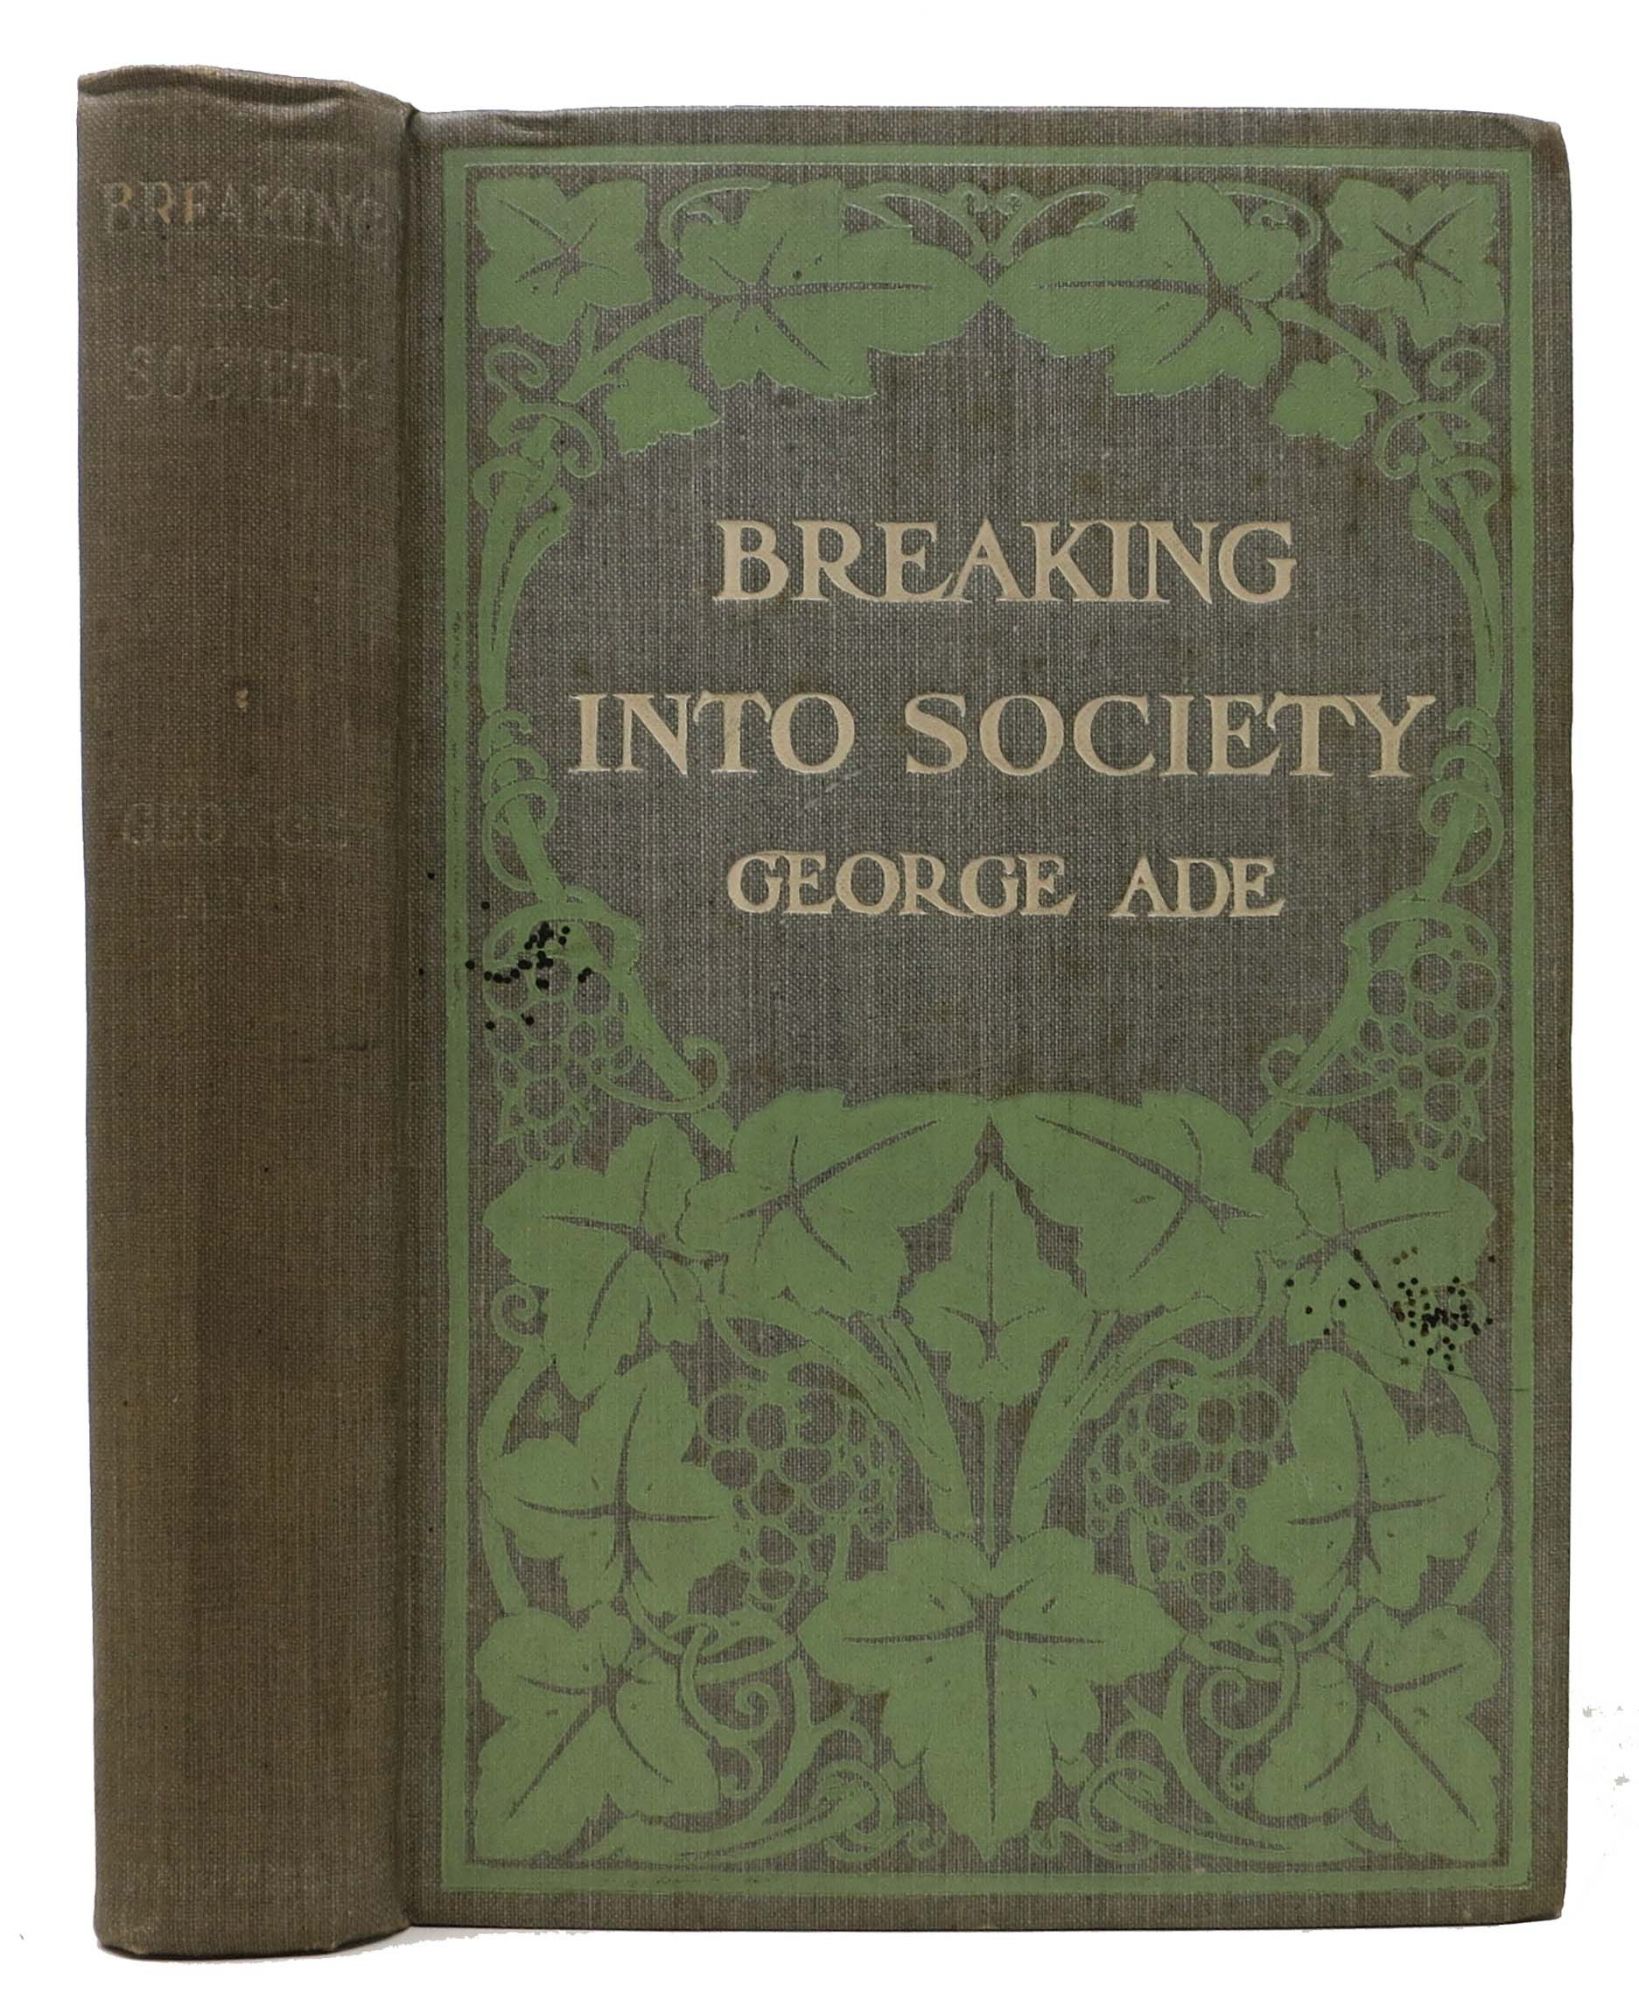 Ade, George [1866 - 1944] - BREAKING Into SOCIETY